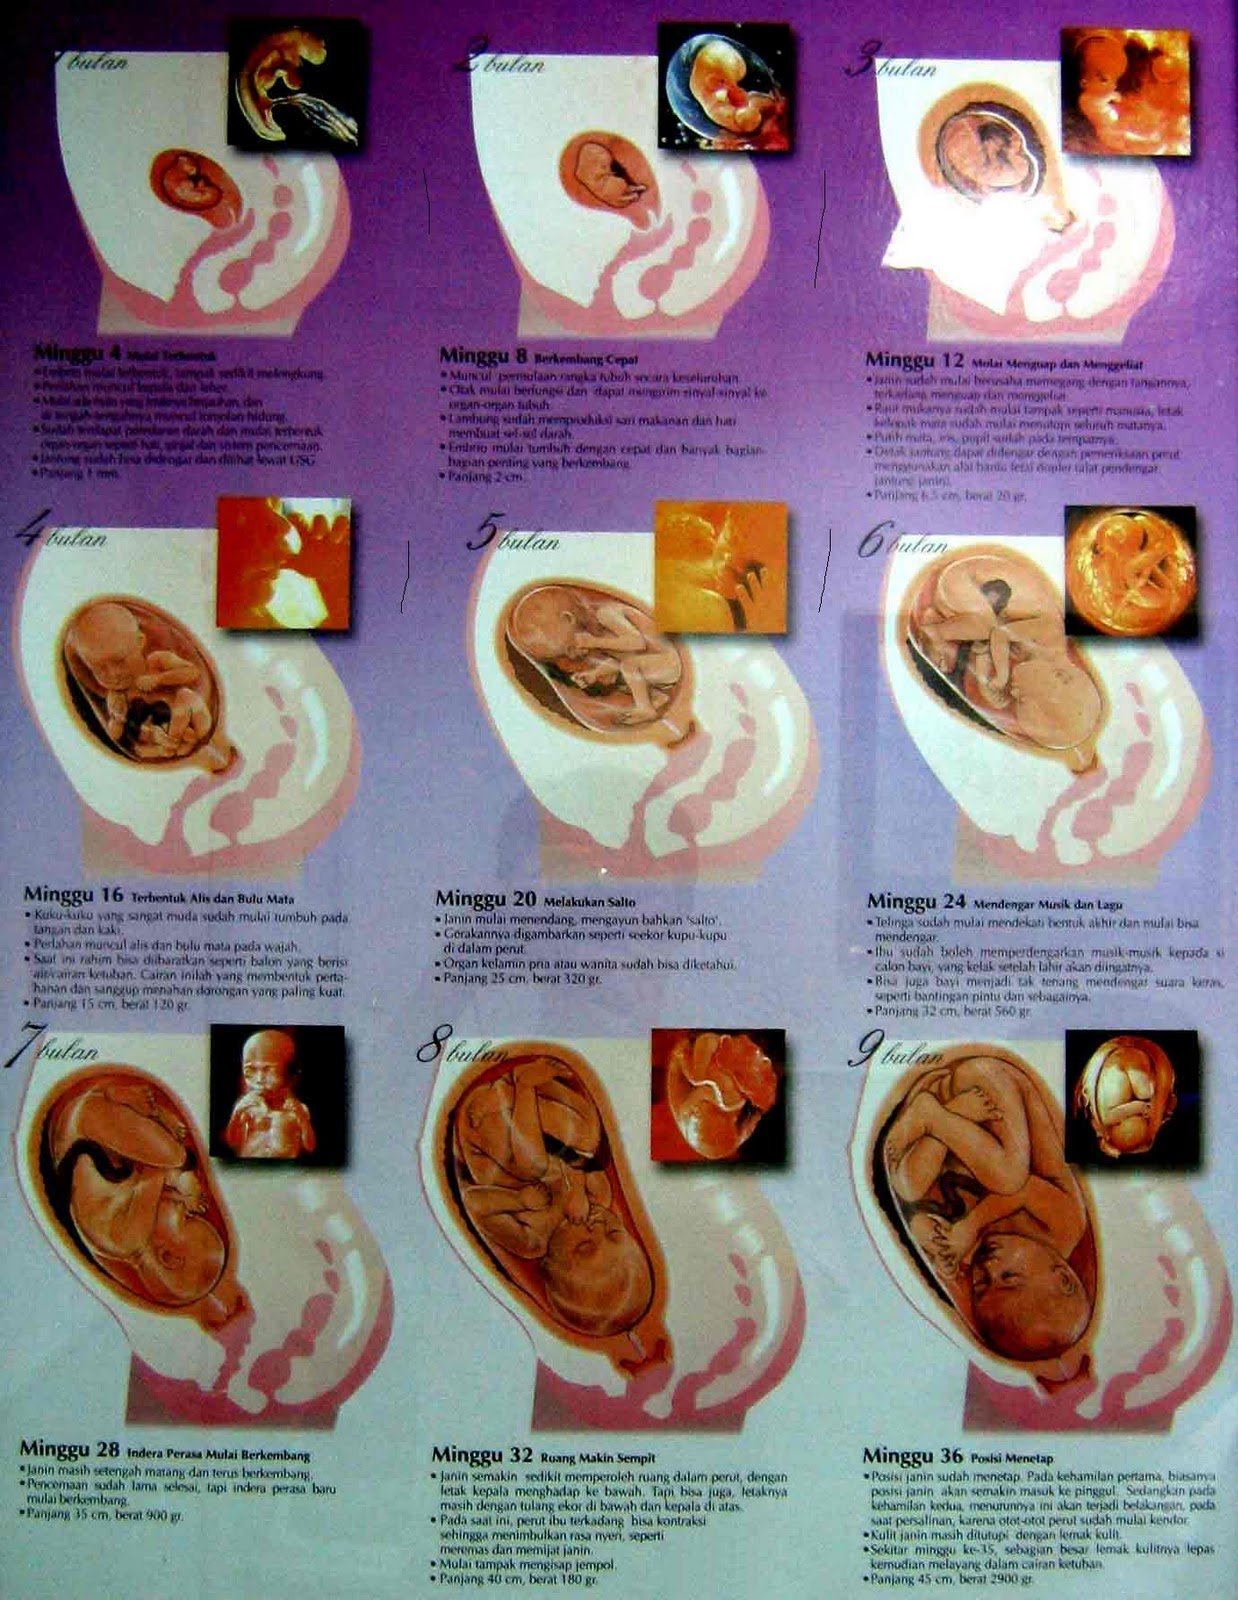 pregnancy-40-weeks-of-pregnancy-information-an-overview-in-the-form